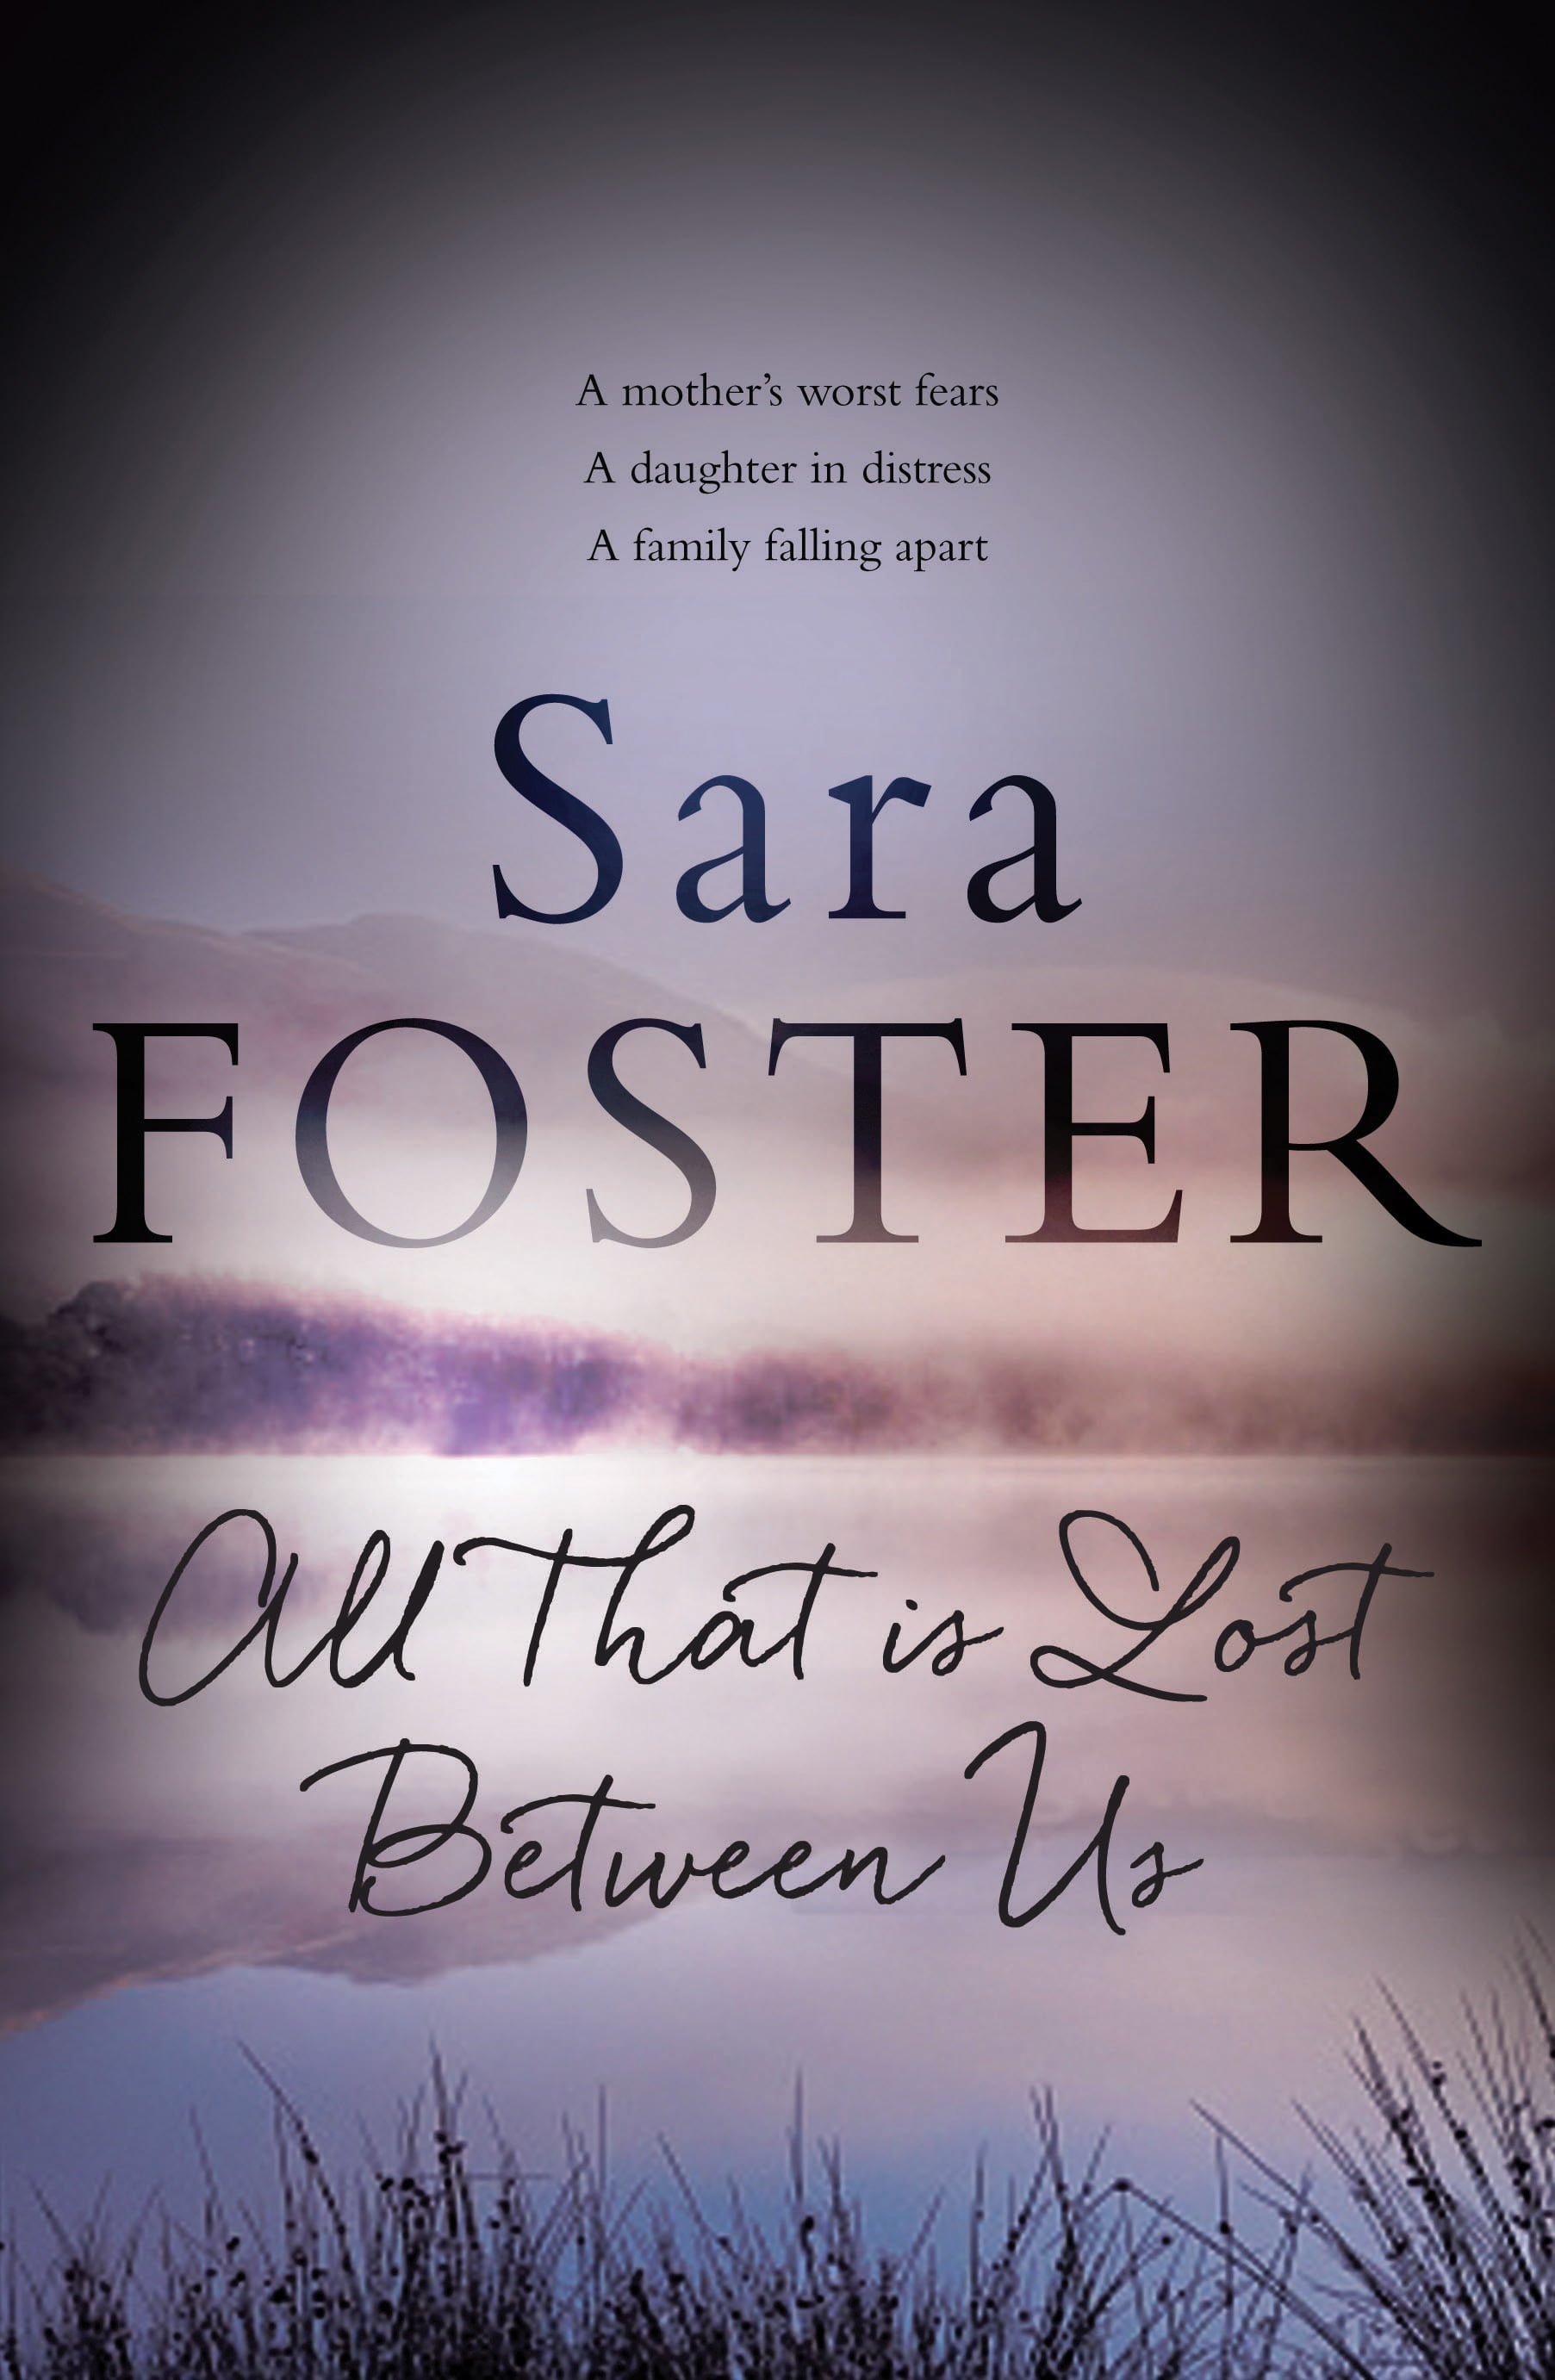 Book of the Week: All That is Lost Between Us by Sara Foster